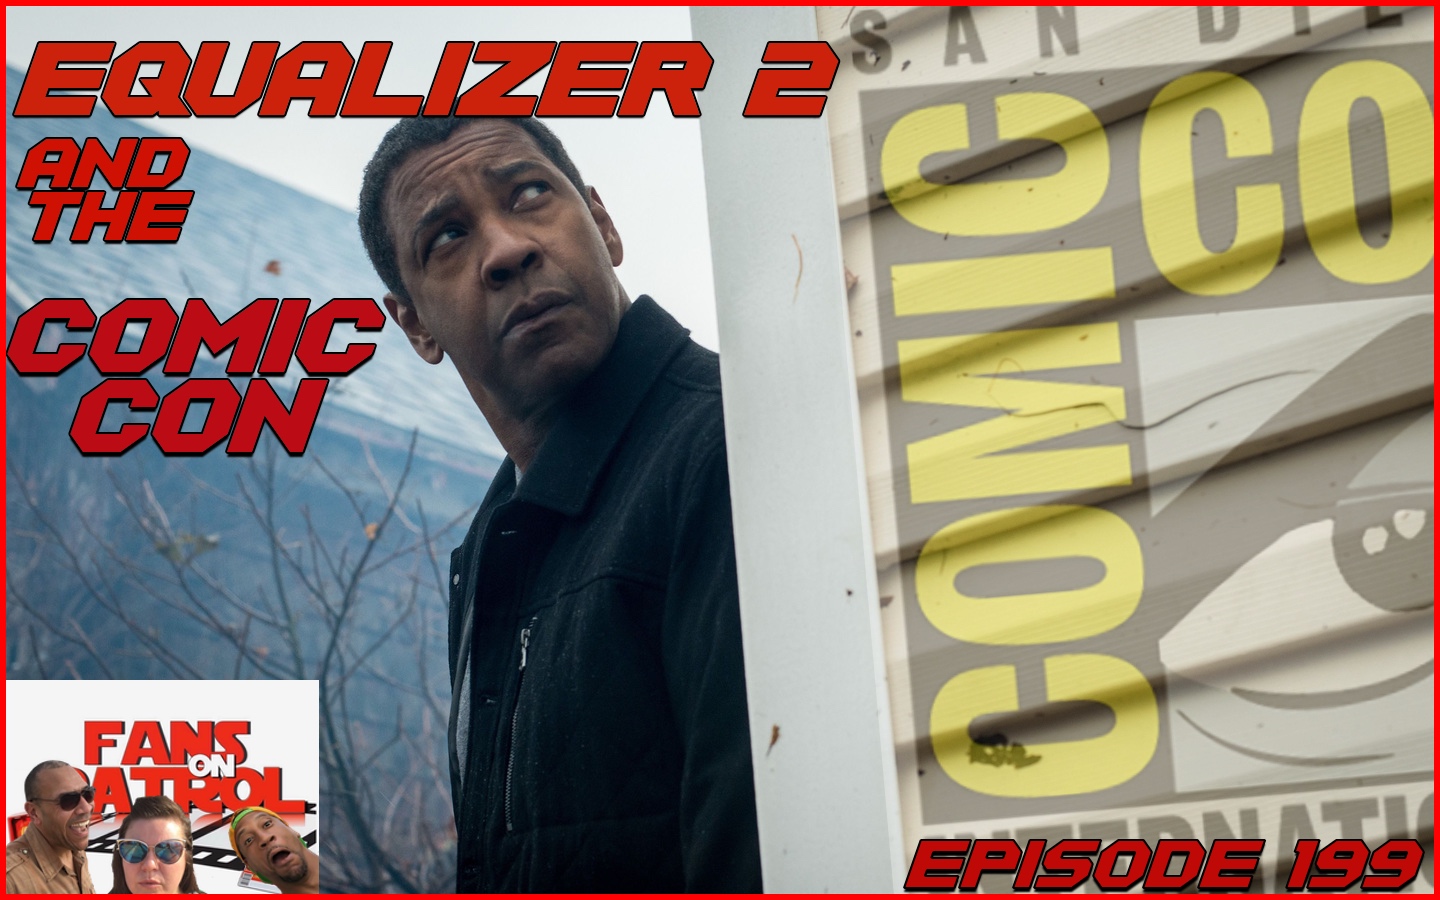 EQUALIZER 2 AND THE COMIC CON EPISODE 199